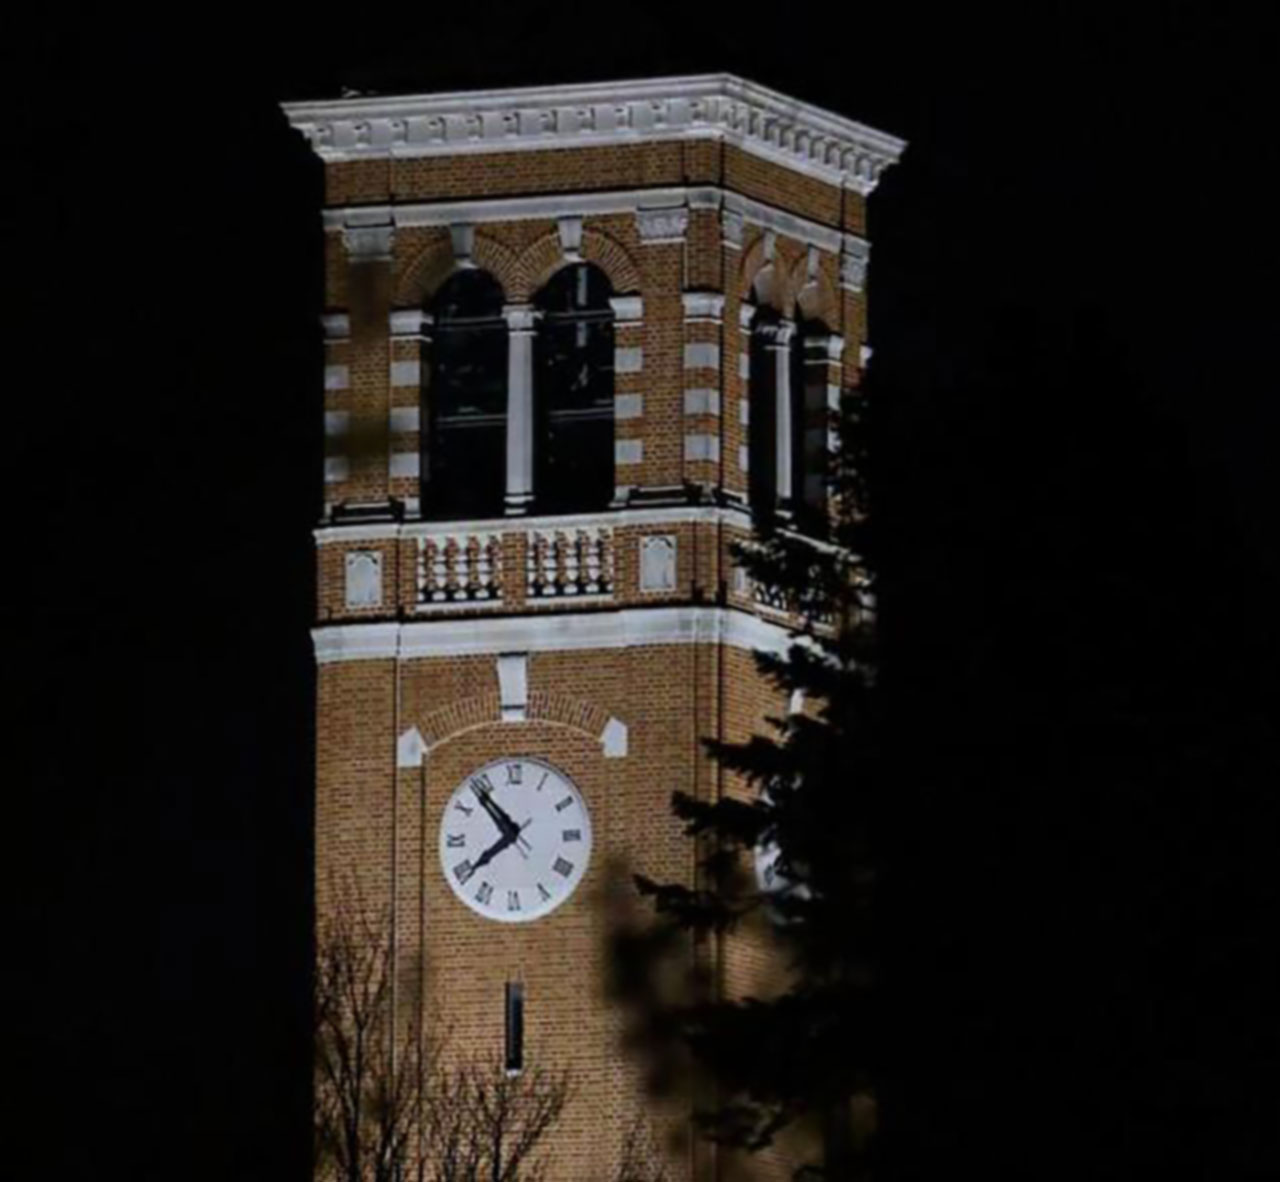 Campanile during the night.